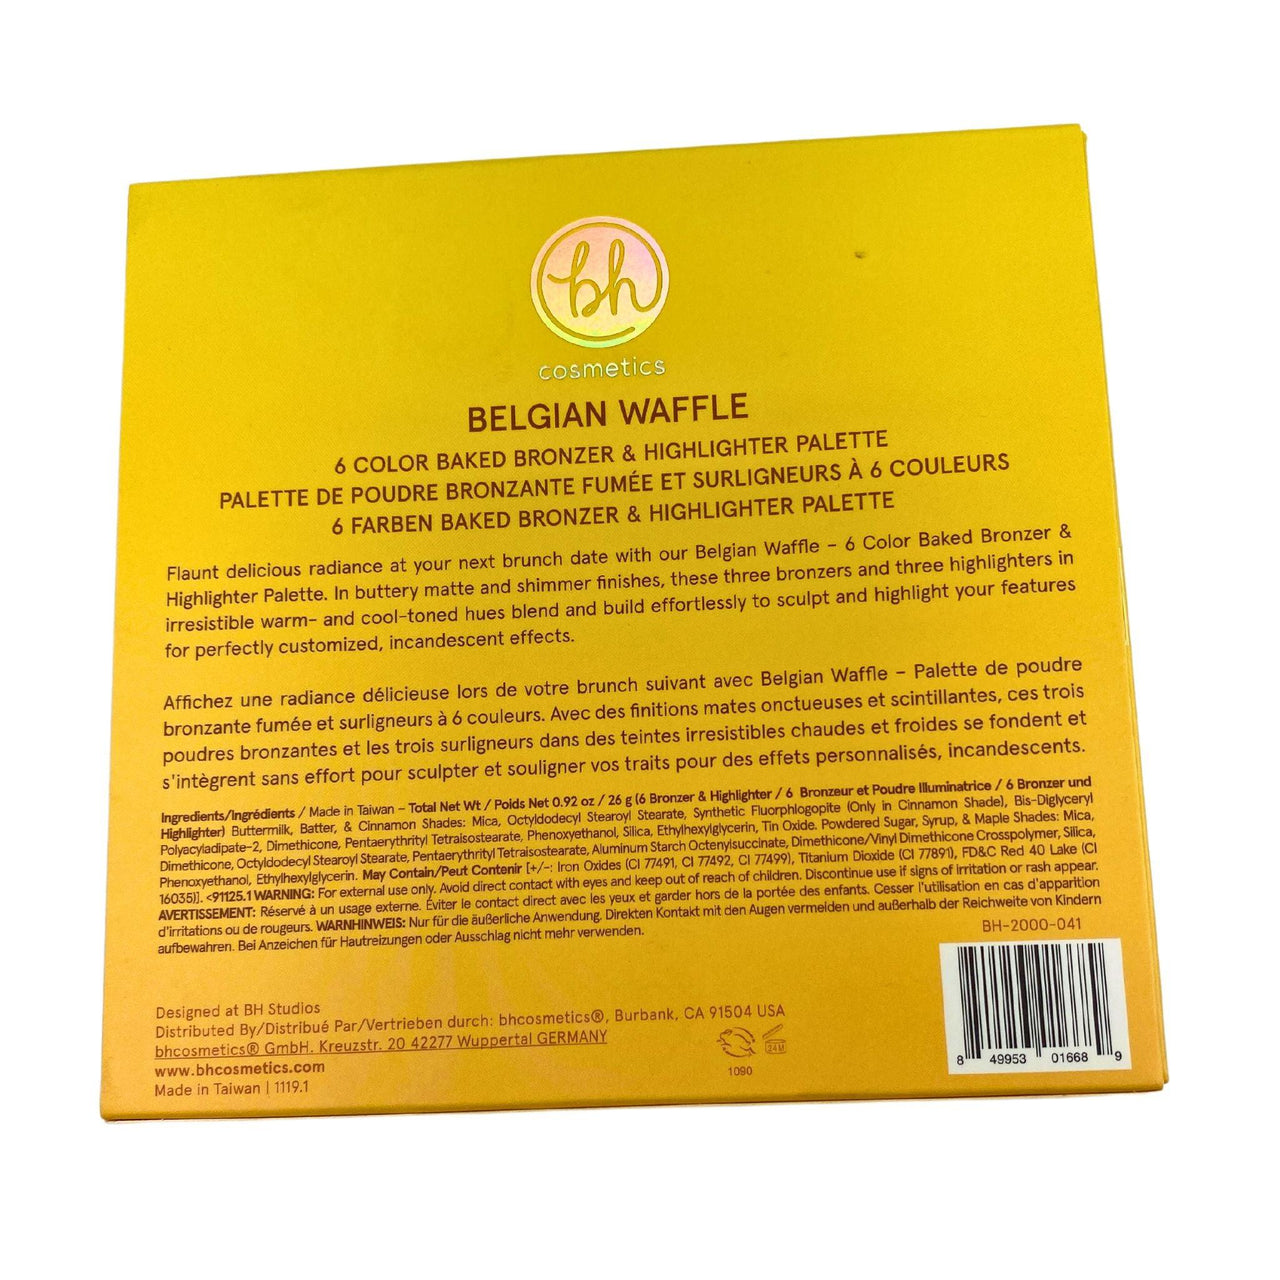 BH Cosmetics Weekend Vibes Belgian Waffle Bronzer & Highlighter Palette 0.92oz /26g (30 Pcs Lot) - Discount Wholesalers Inc